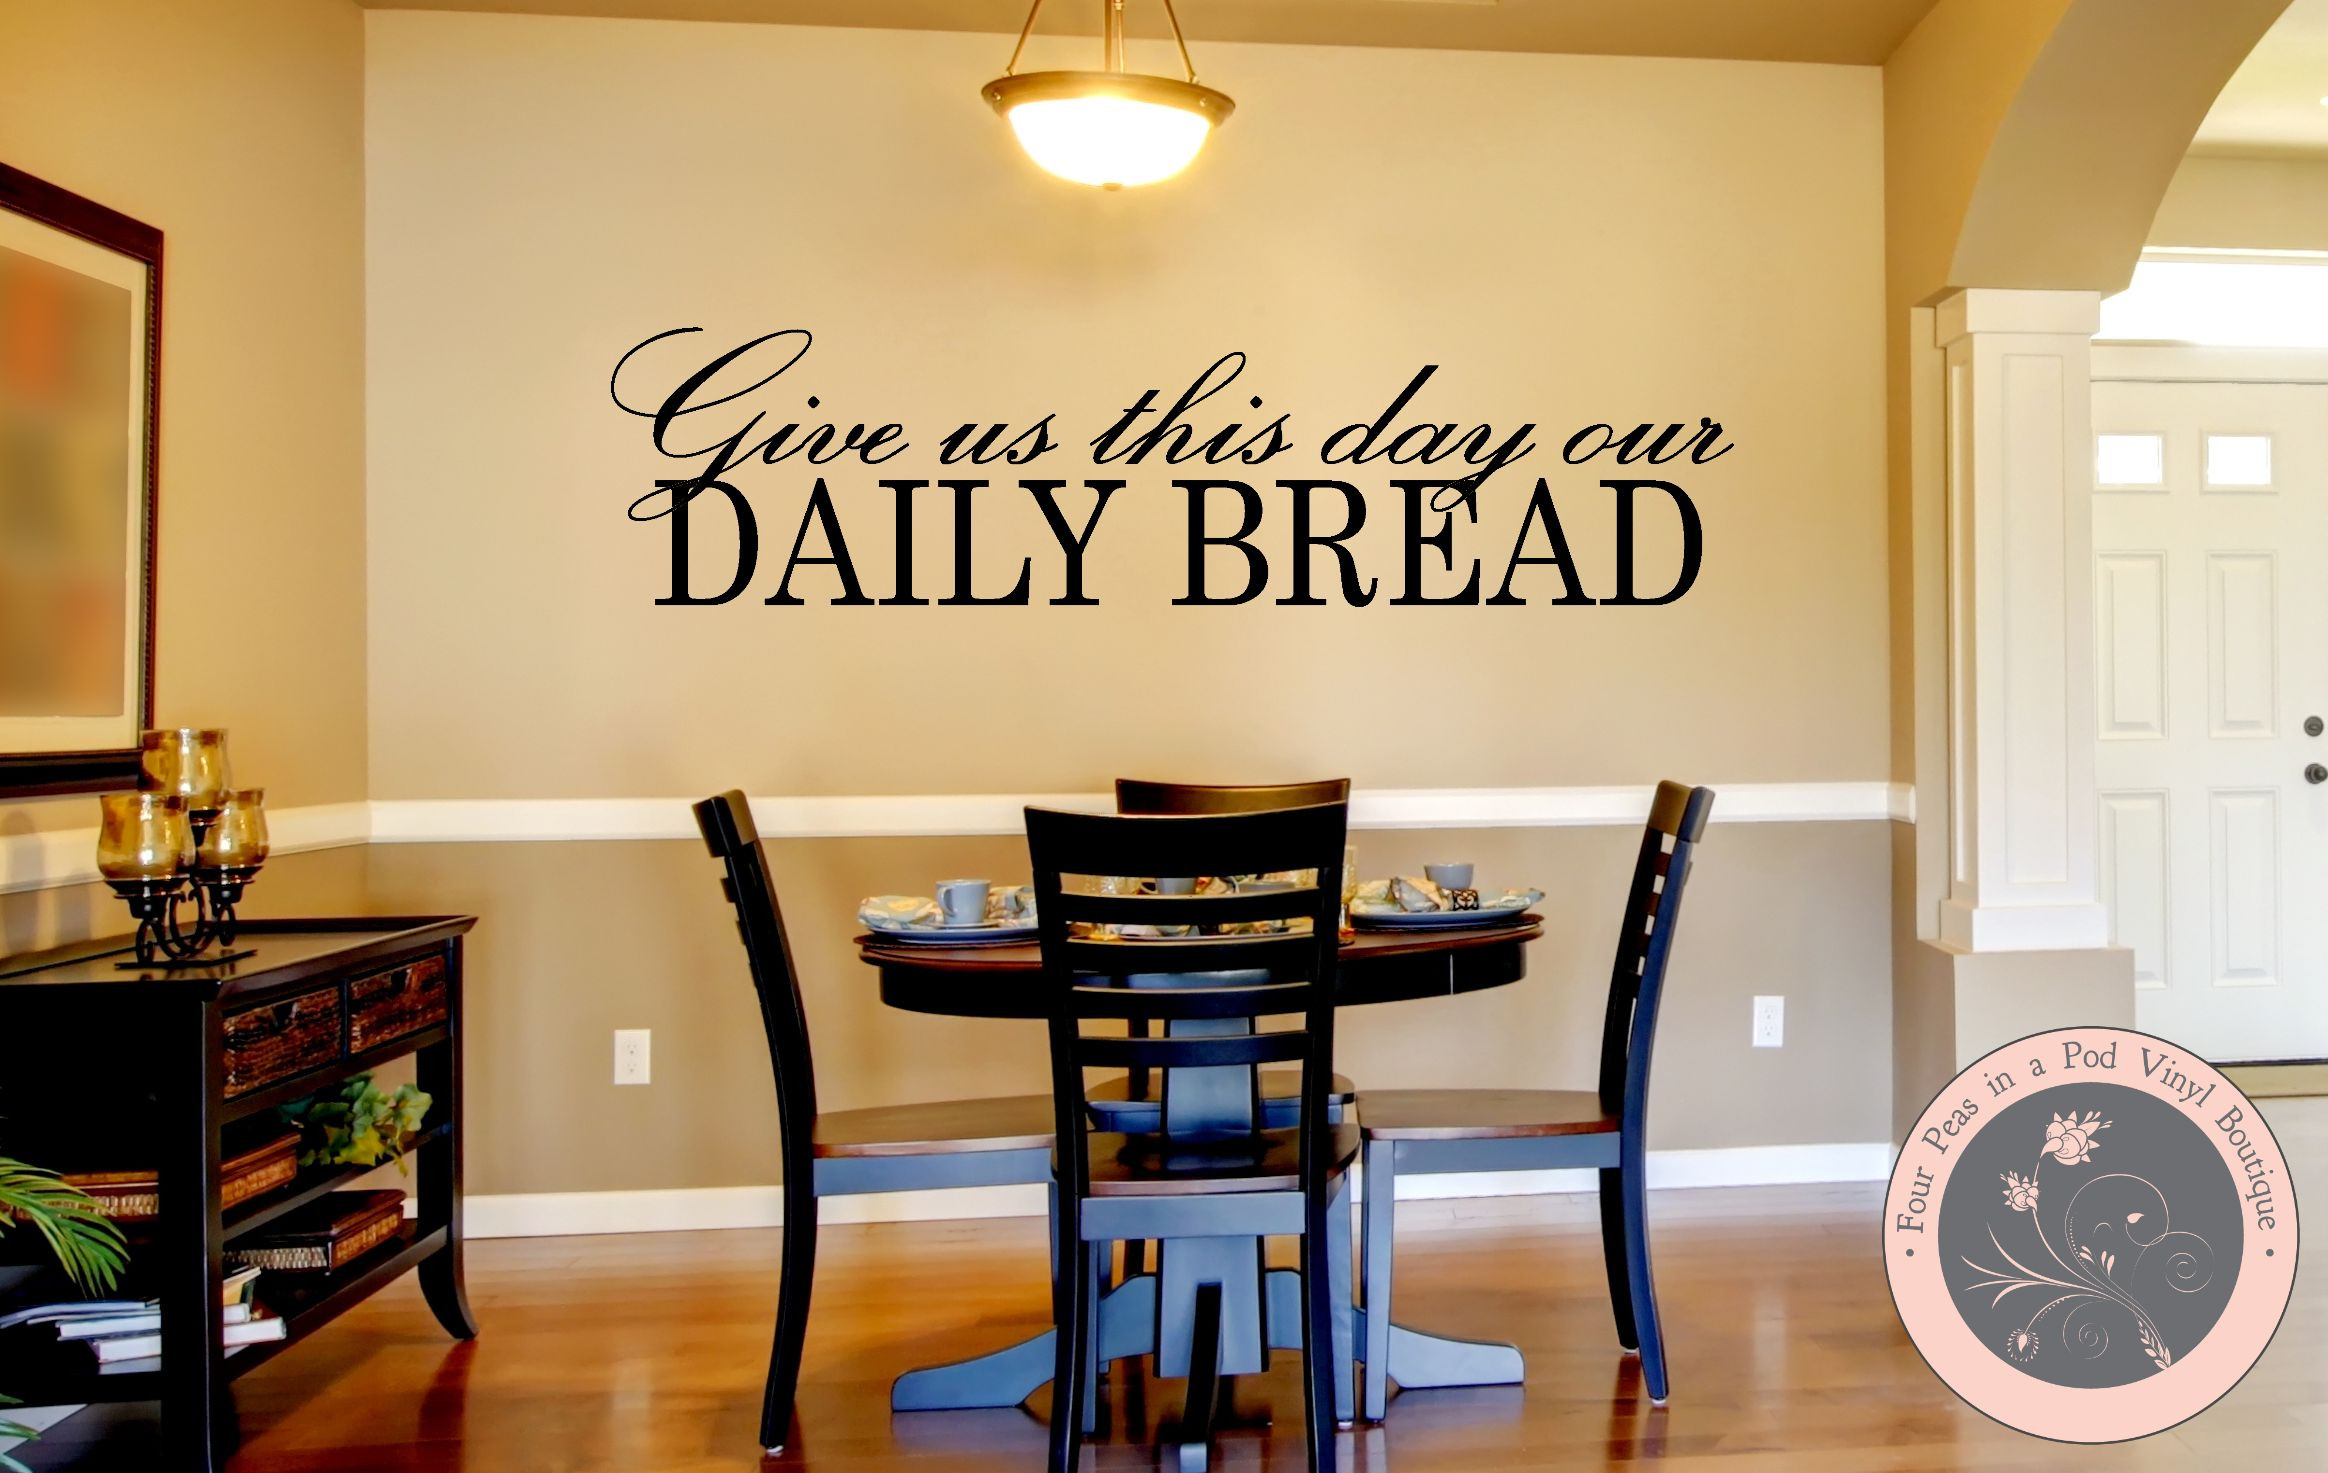 Wall Art For The Kitchen
 Christian Wall Decor Give Us This Day Our Daily Bread